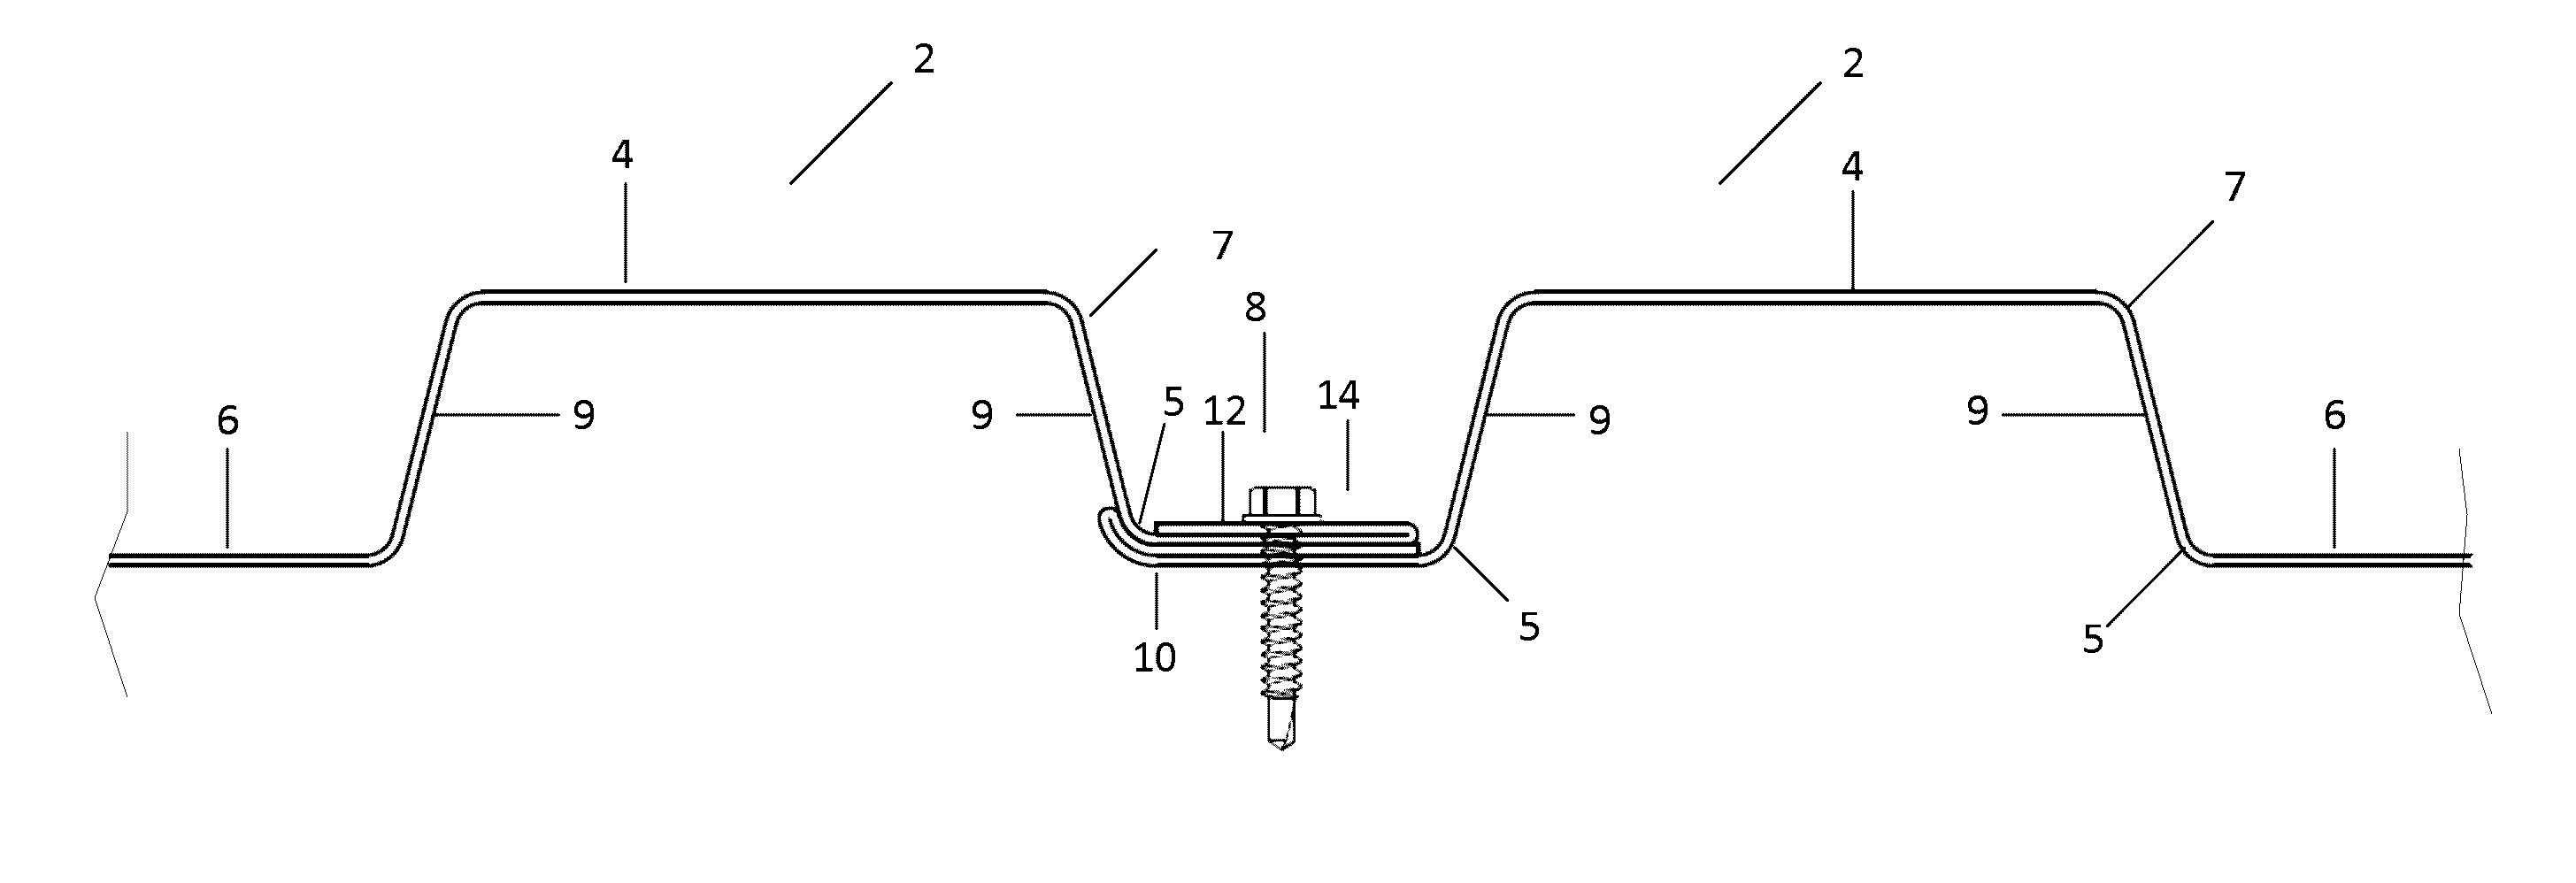 Structural panel systems with a nested sidelap and method of securing